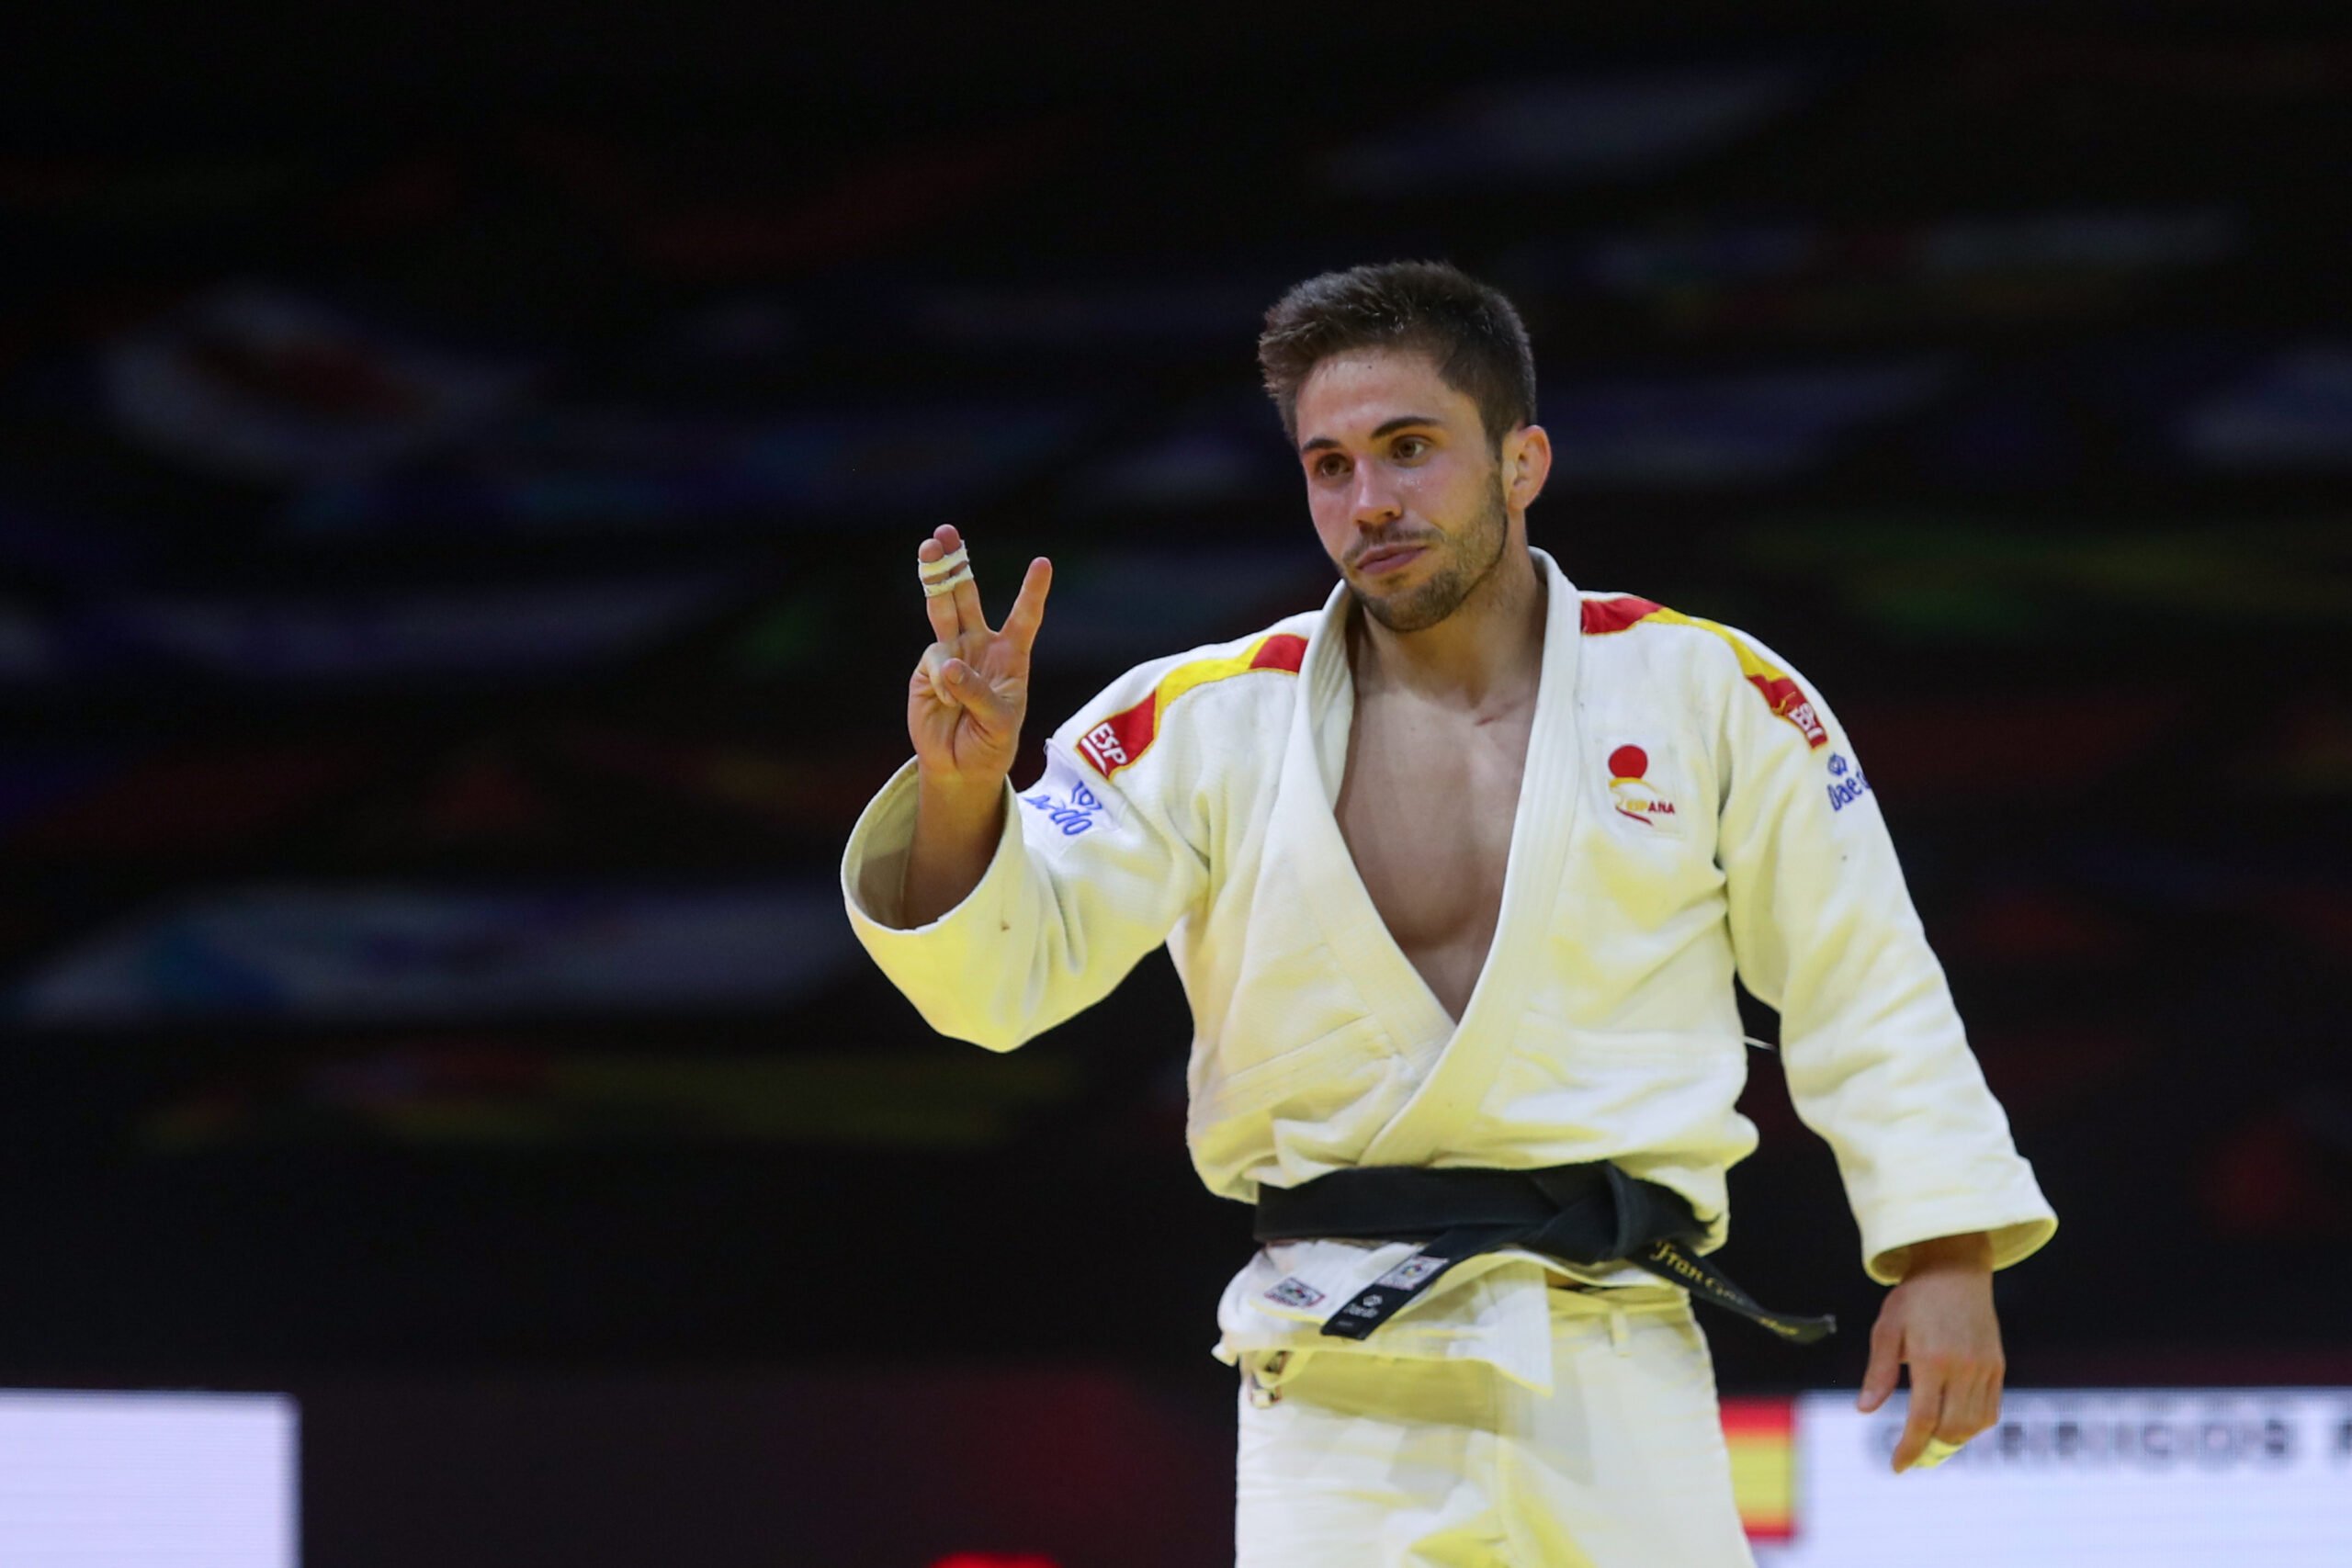 EUROPE HUNGRY FOR WORLD TITLE ON DAY ONE